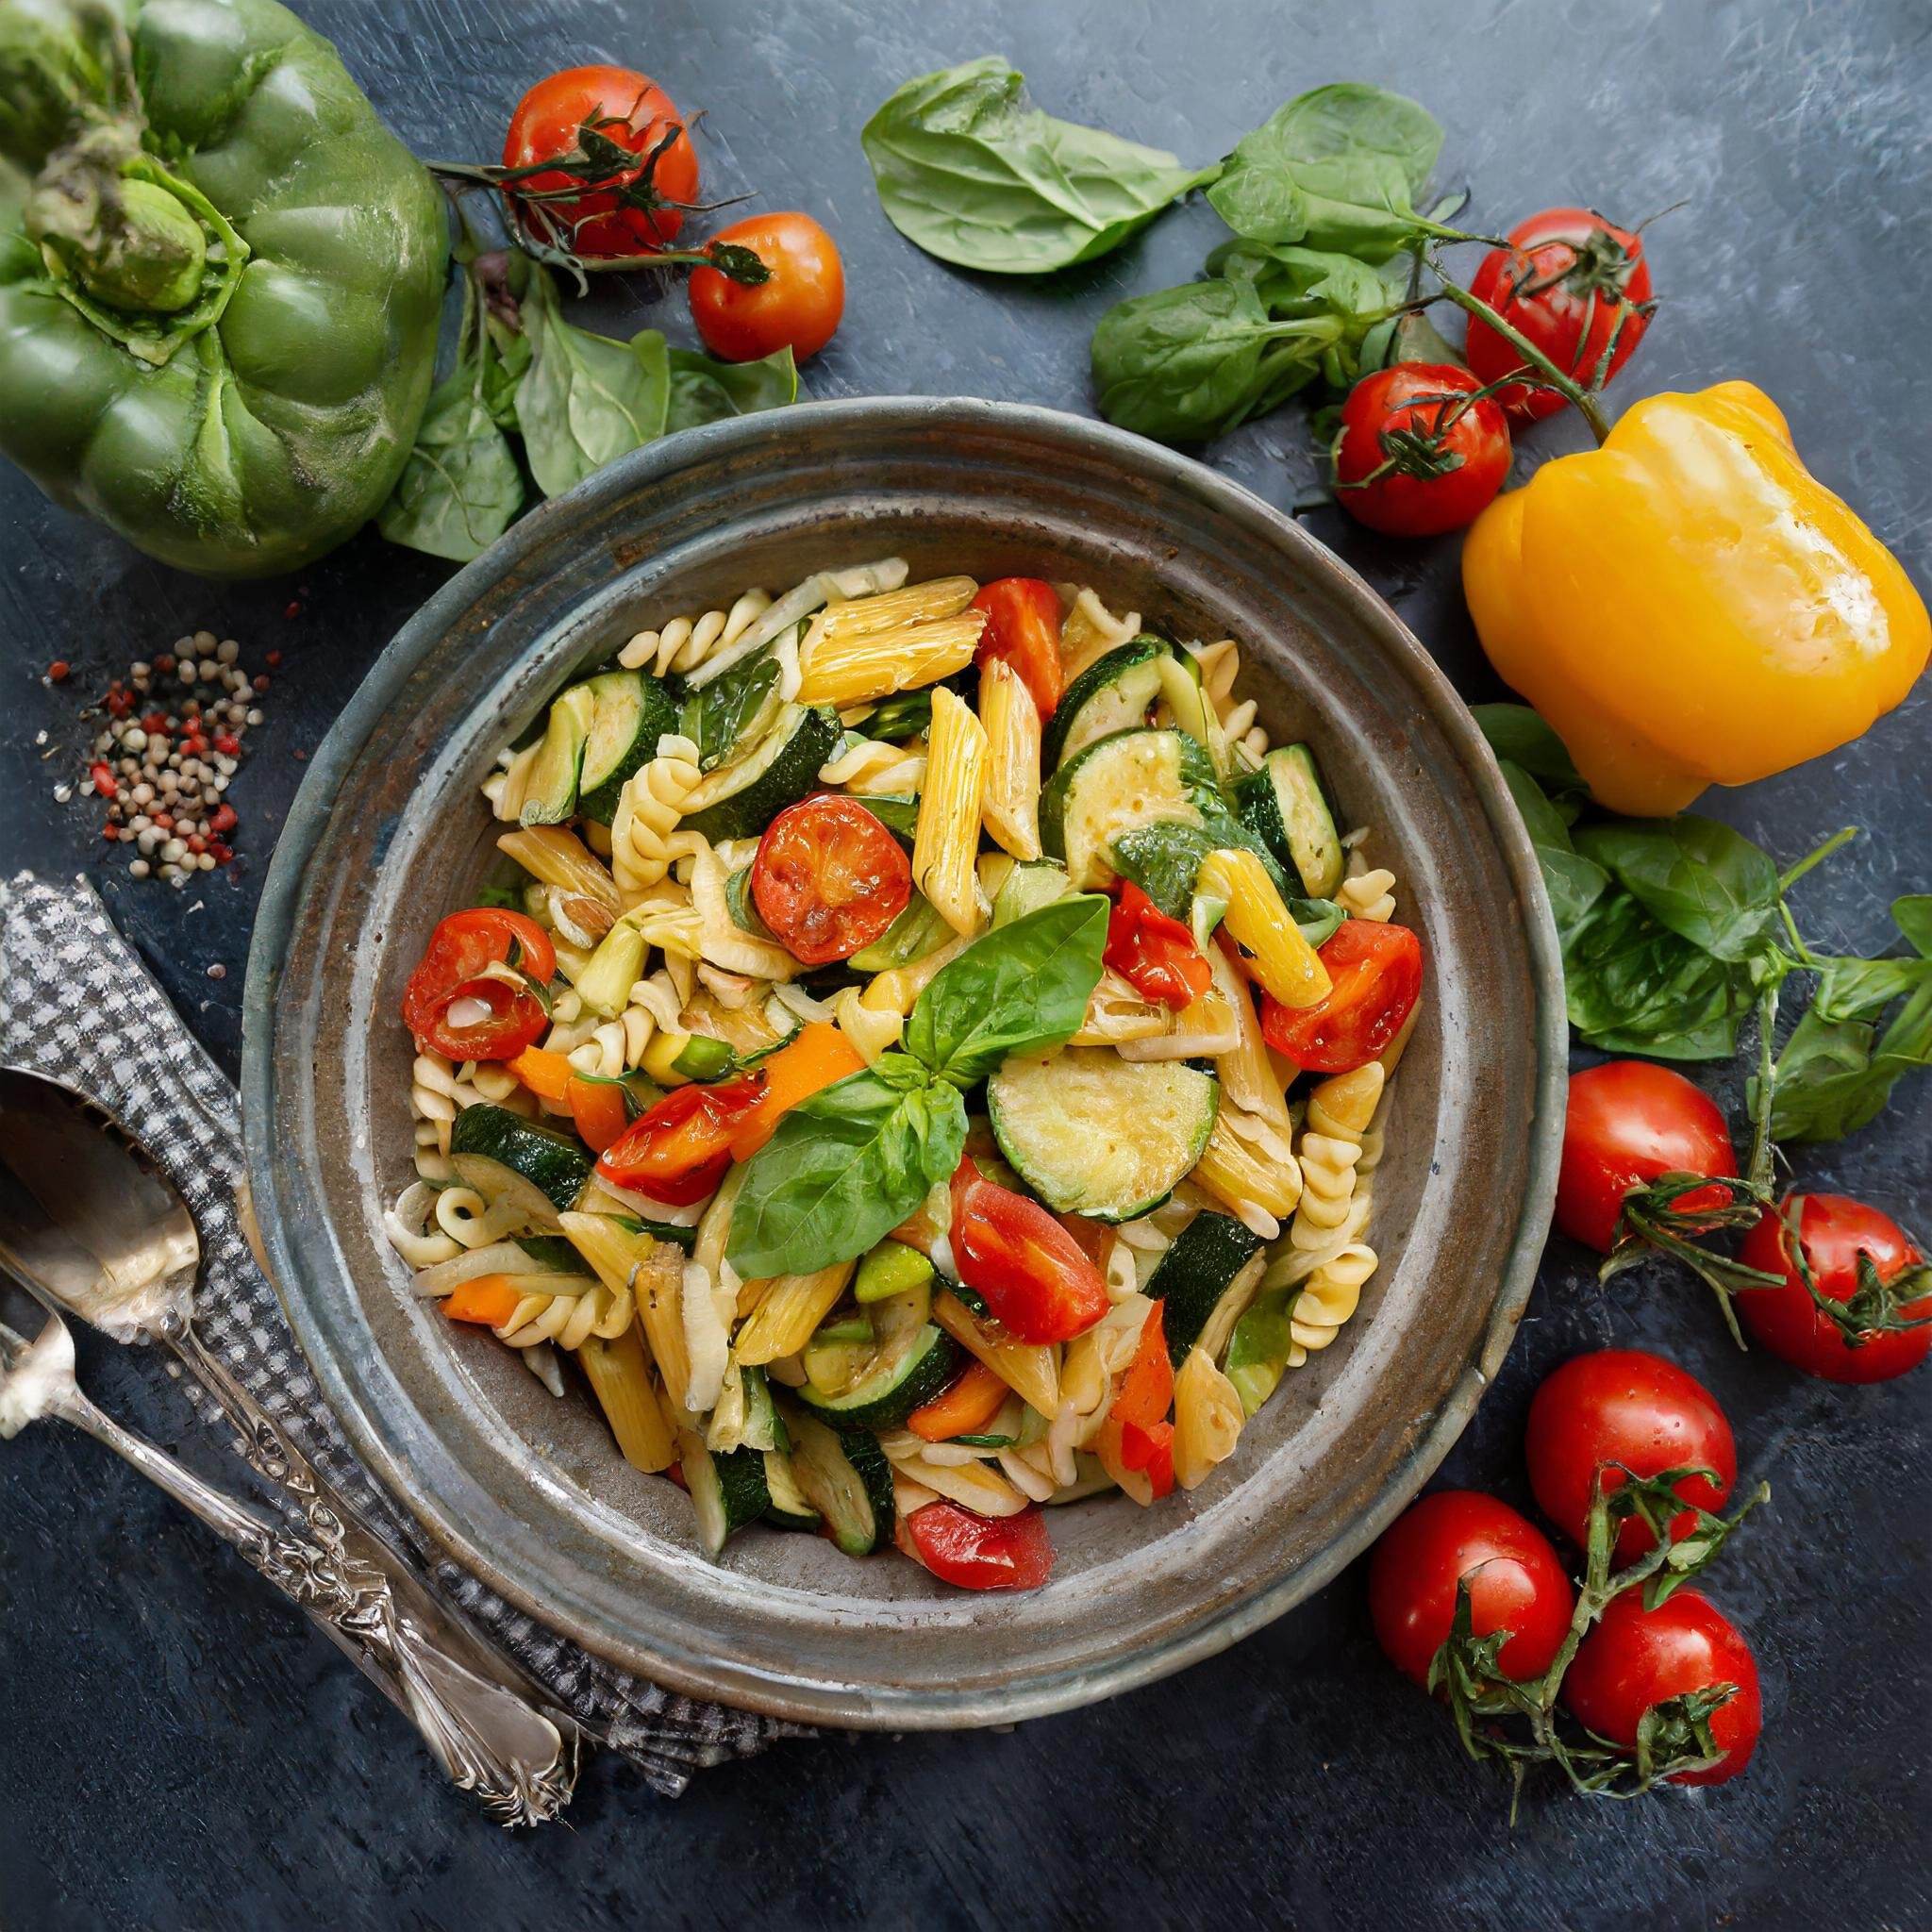 large bowl of pasta primavera with zucchini, bell peppers, cherry tomatoes, and plenty of pasta as a refreshing balanced dish